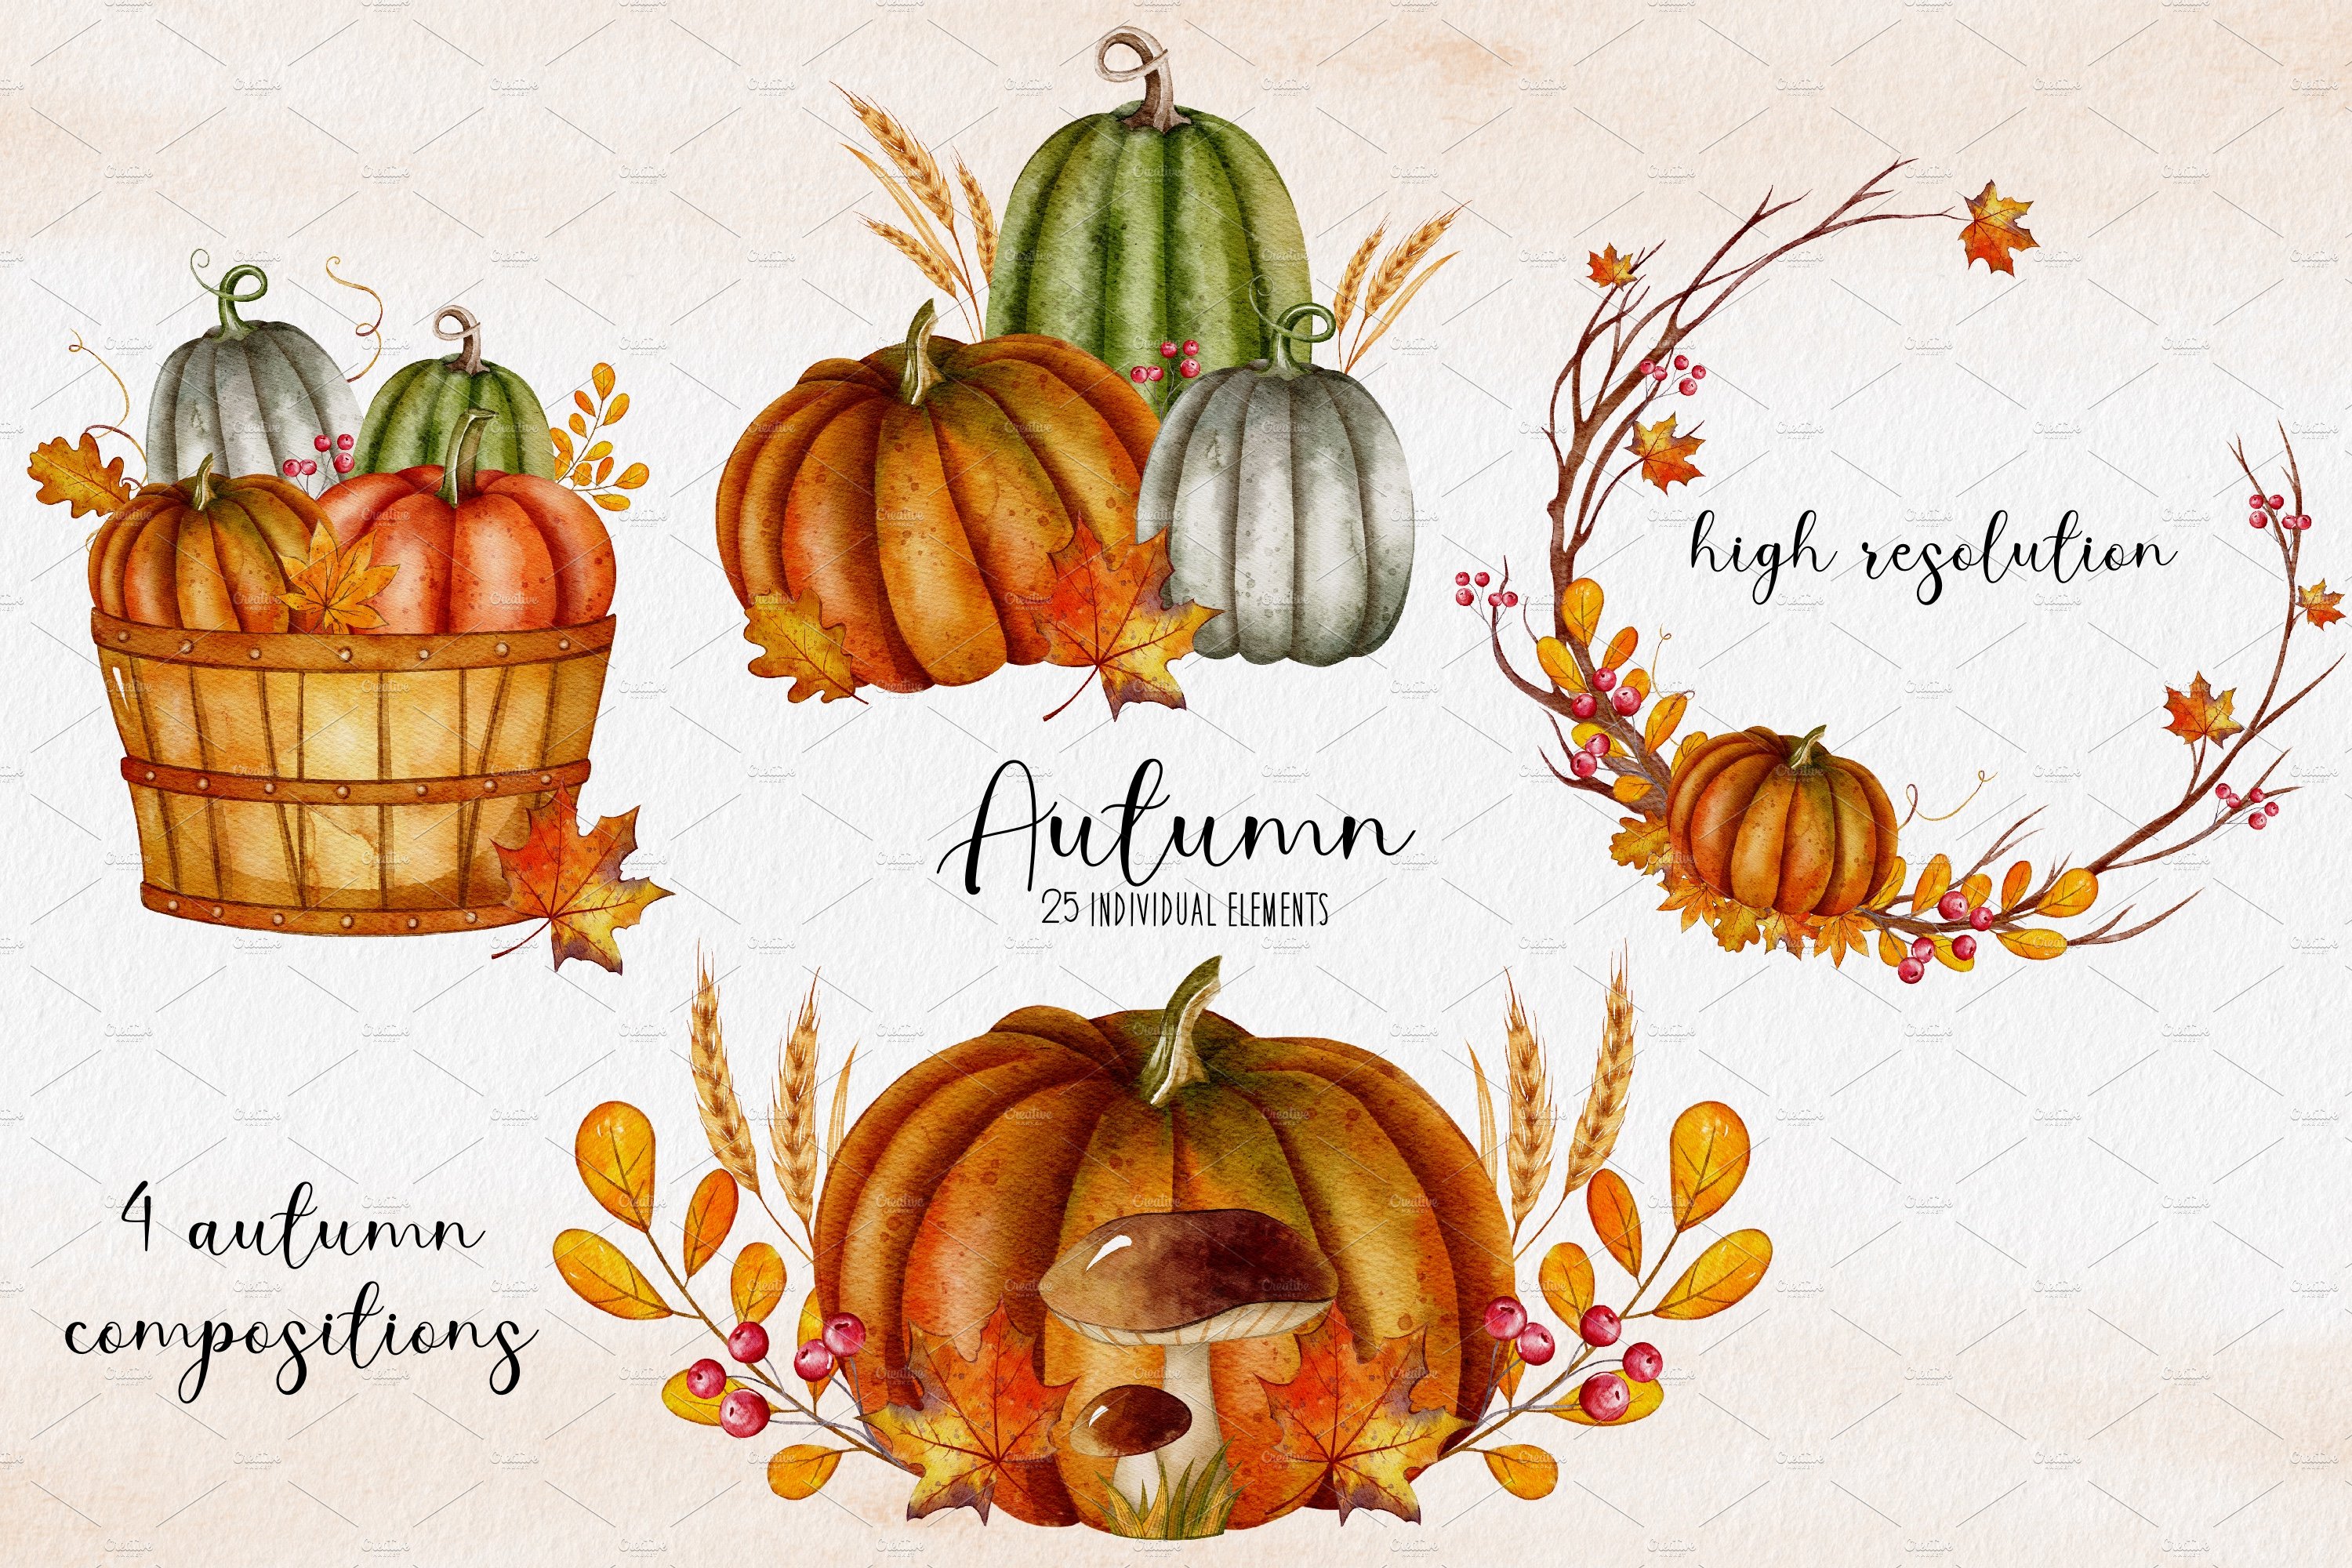 Perfect autumn choice for the thematic illustration.